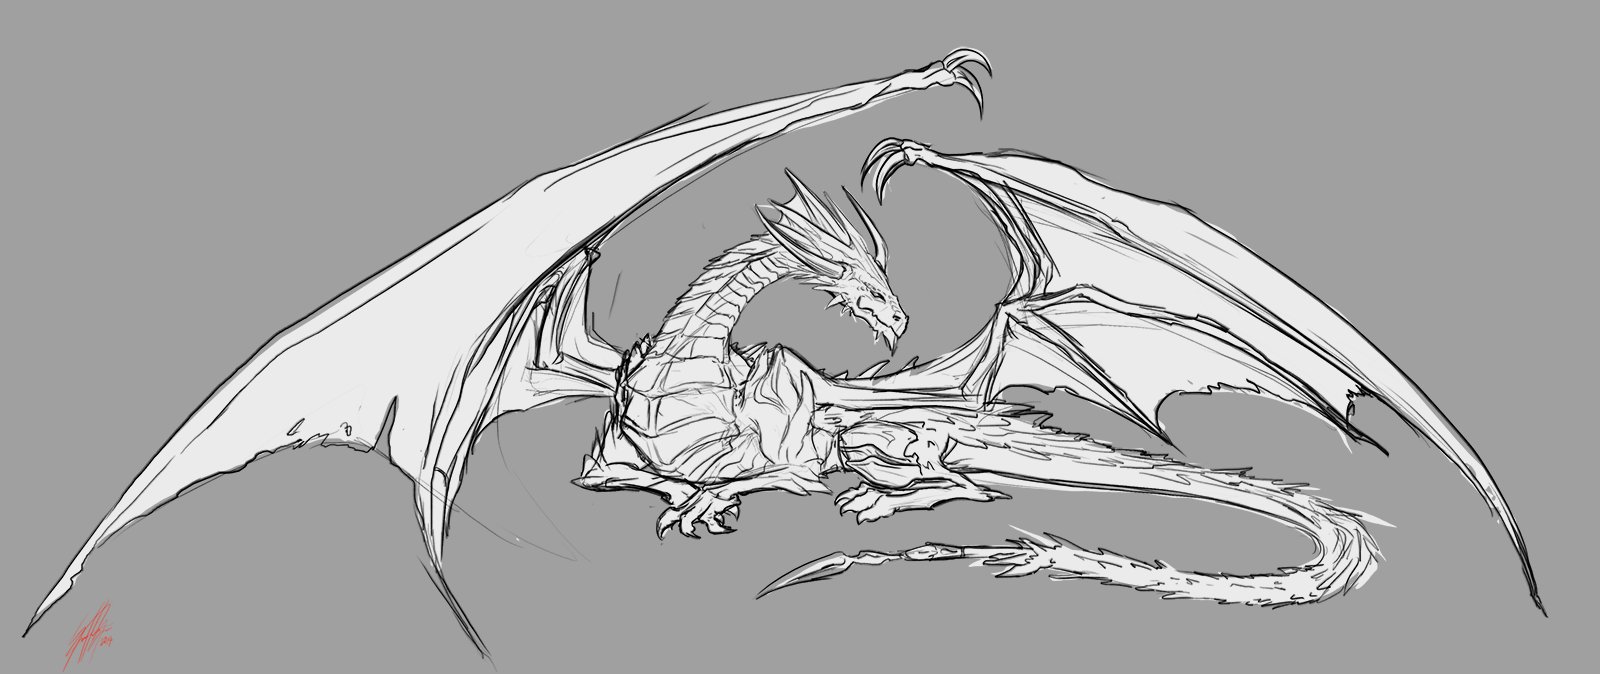 Series of Sketches - Dragons.